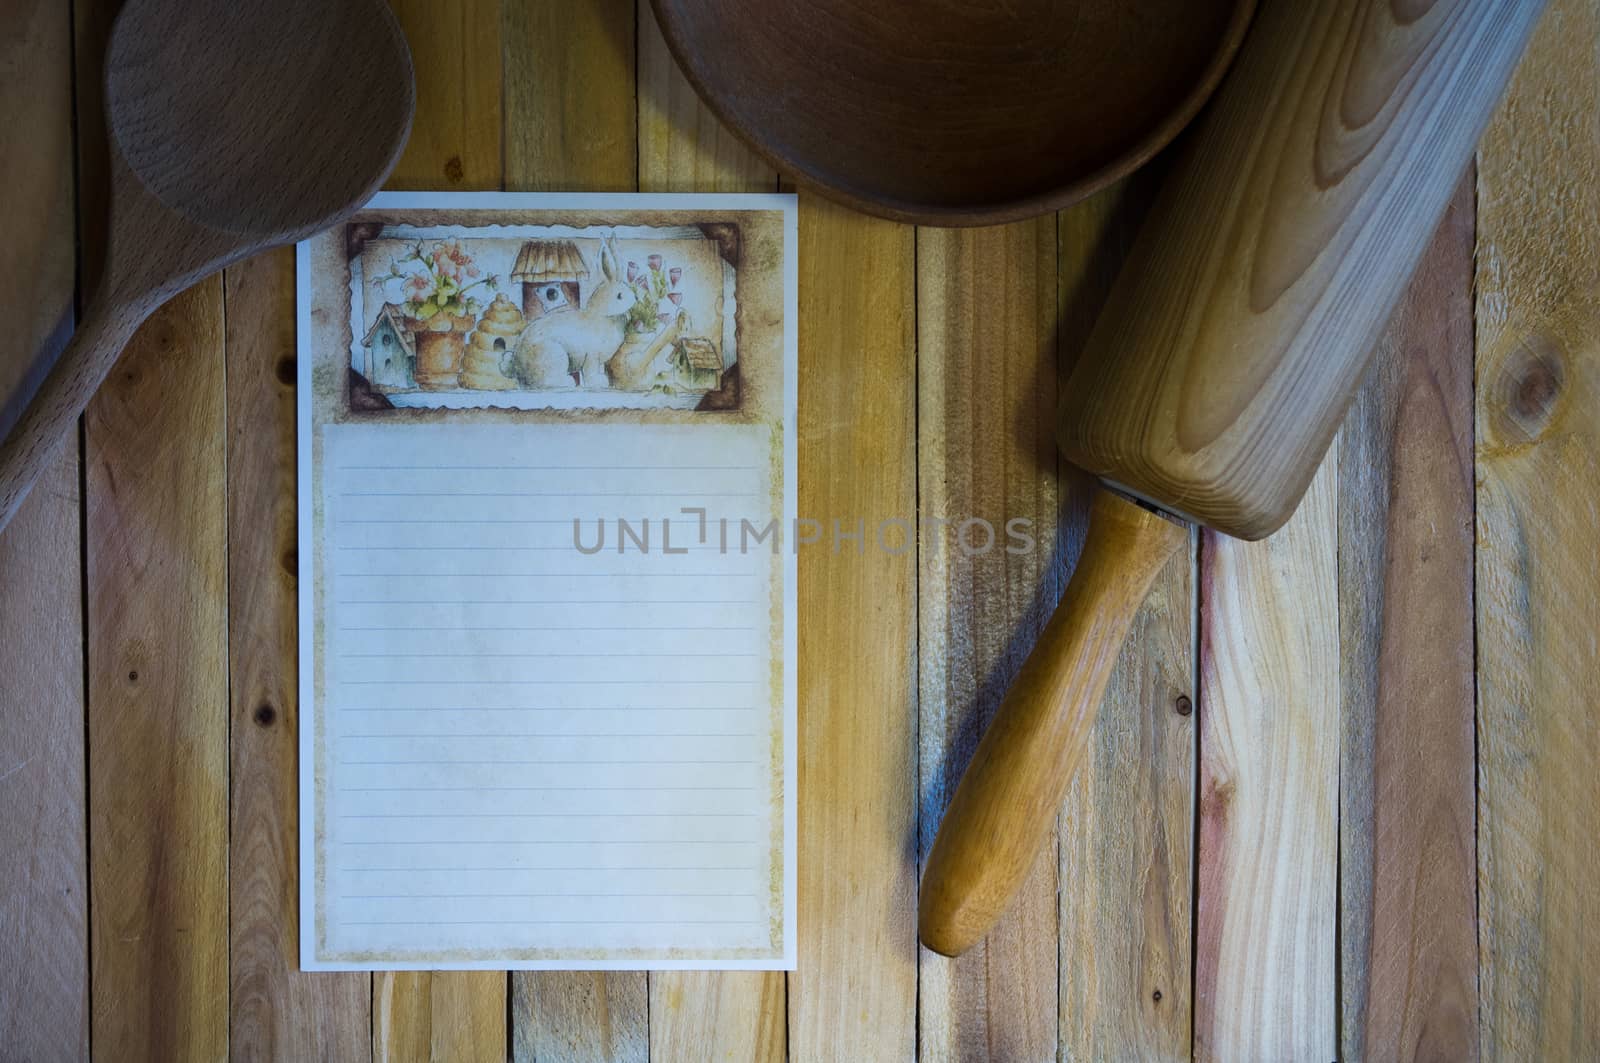 Kitchen Scene with Blank Recipe Card by krisblackphotography